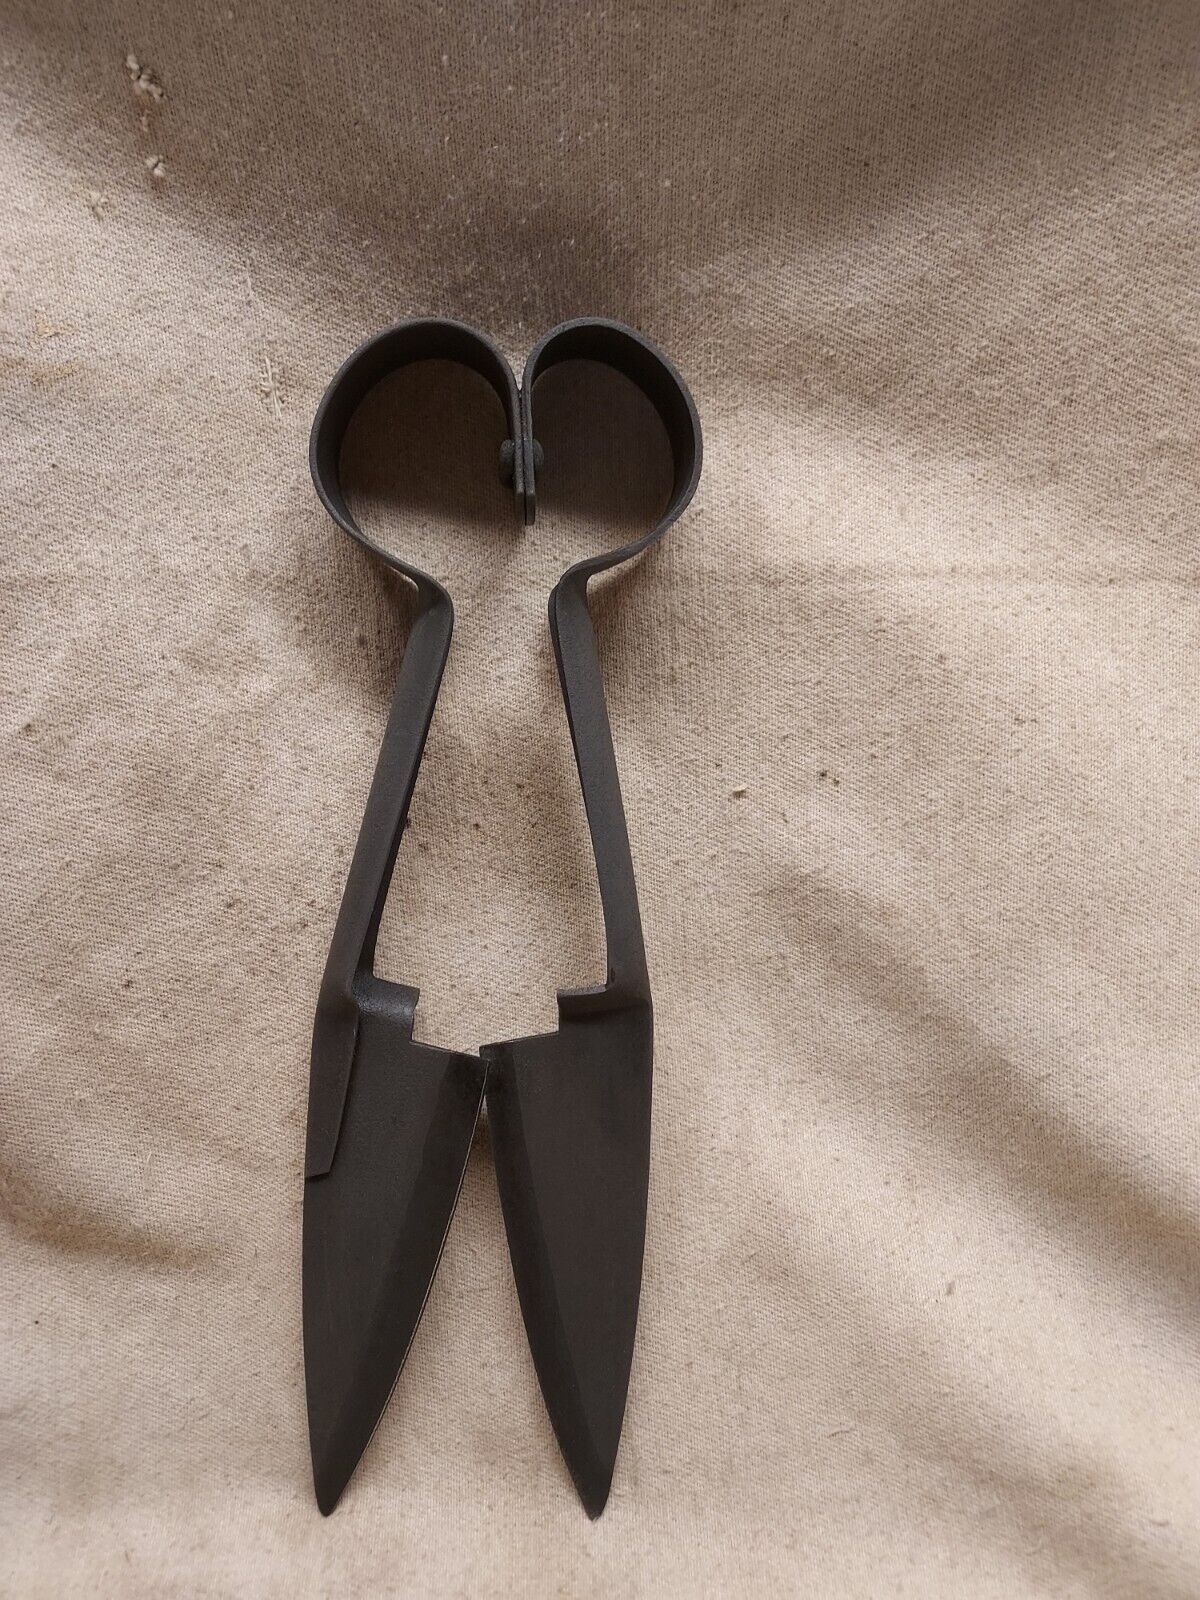 VINTAGE MADE IN GERMANY SHEARS FOR SHEEP OR GRASS CLEANED AND SHARPENED USED